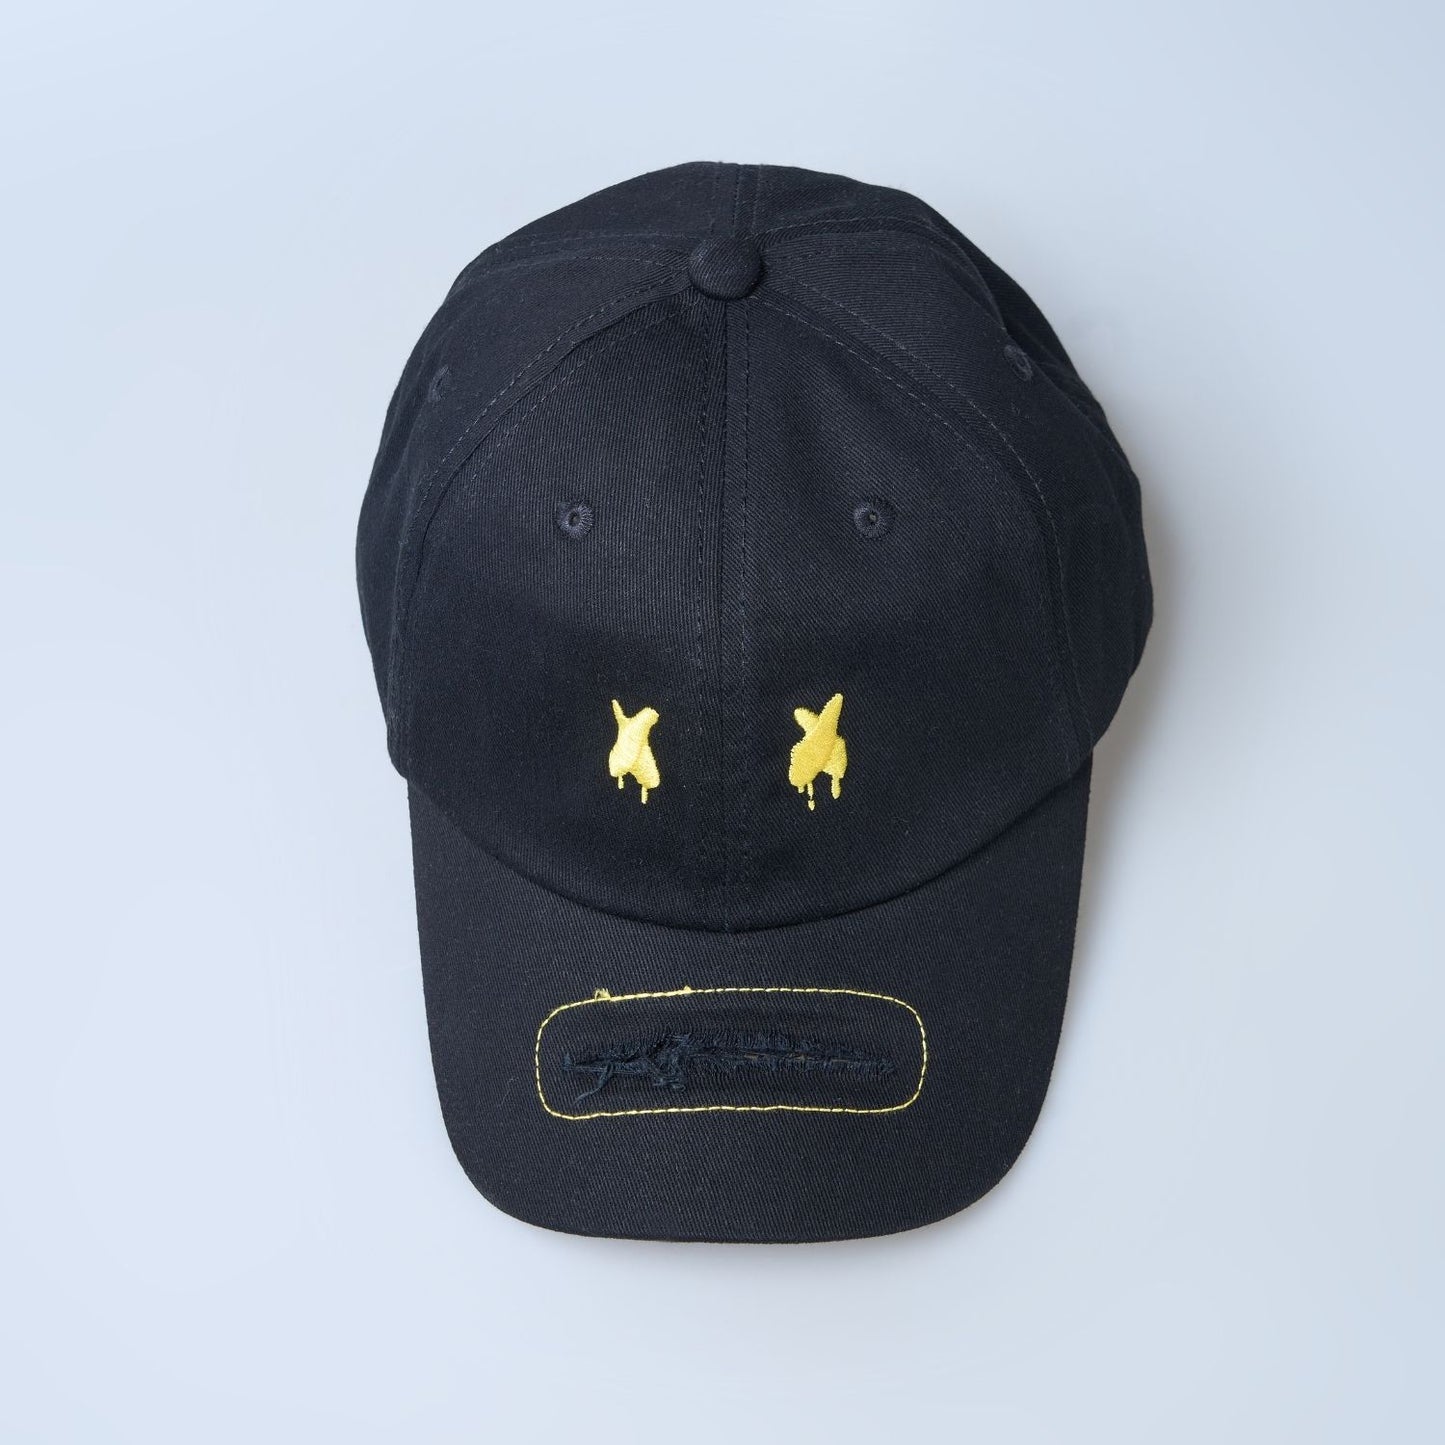 Table-top view of Black colored solid basic cap for men.